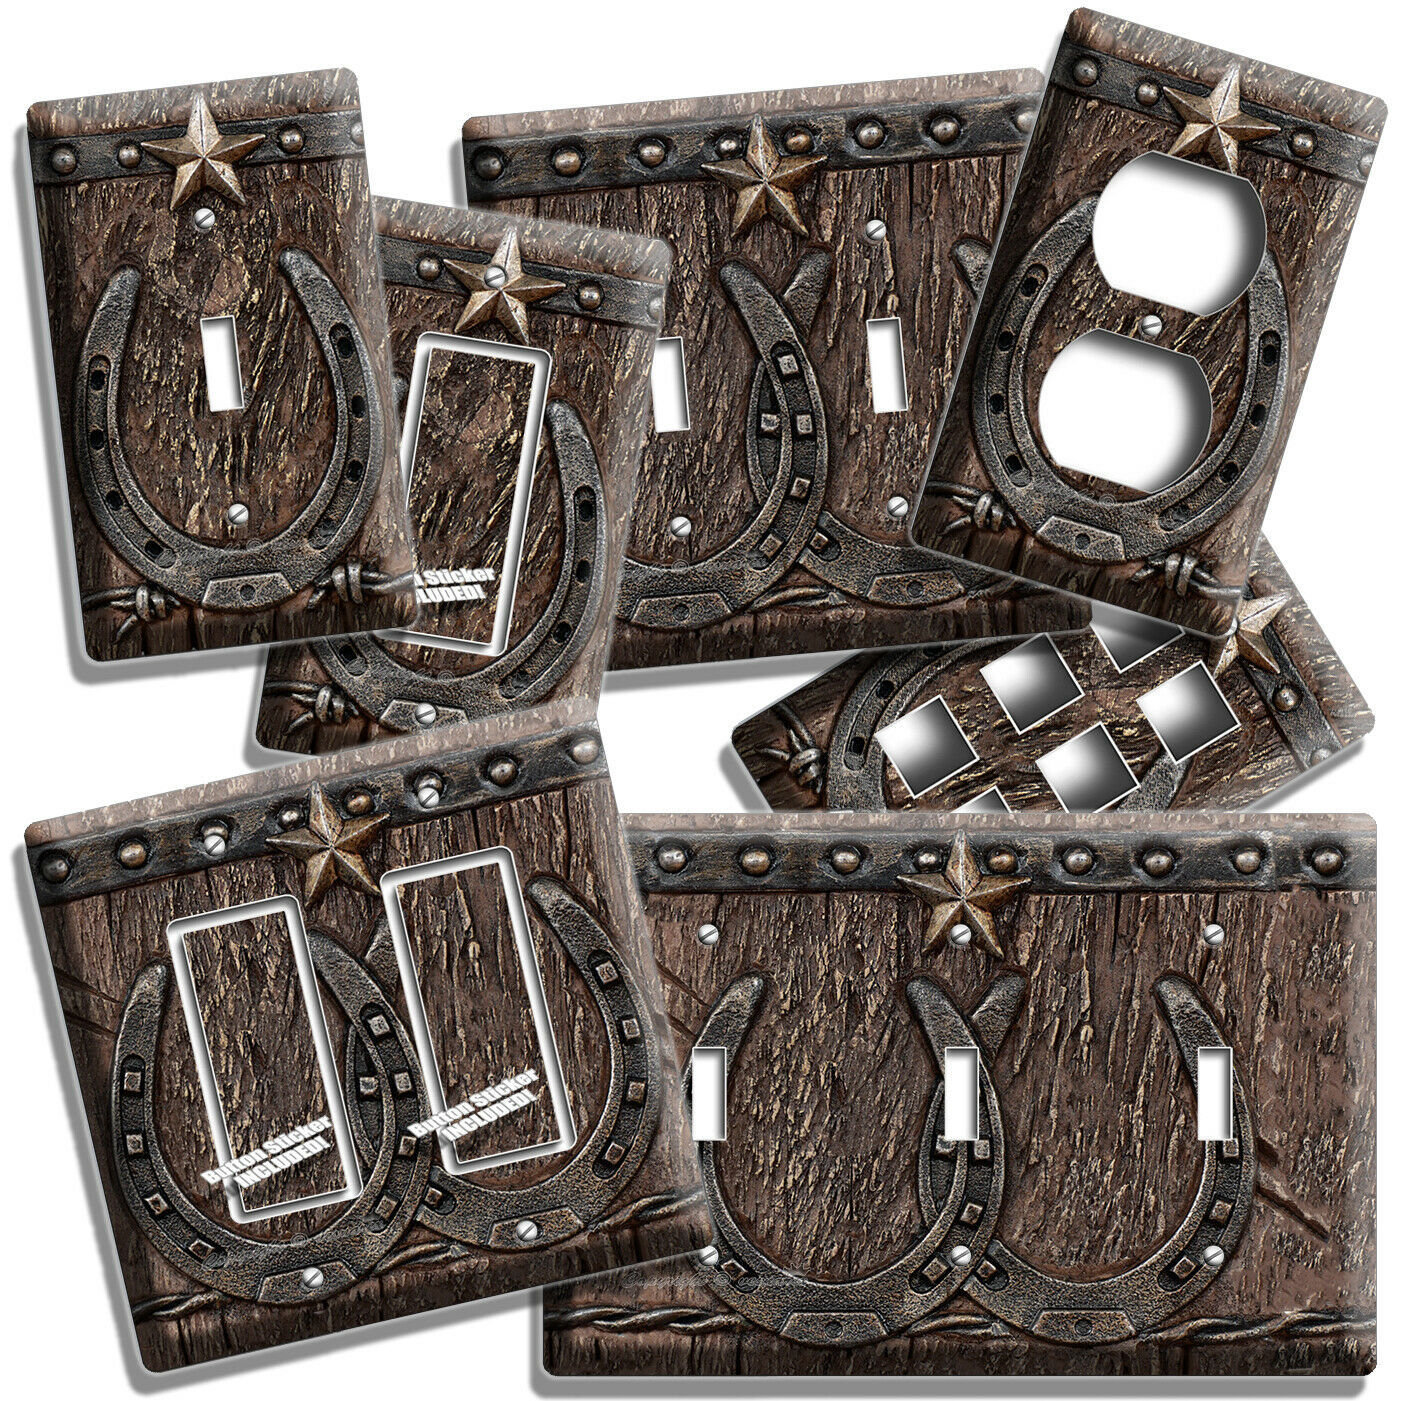 RUSTIC WESTERN COWBOY LONE STAR LUCKY HORSESHOE LIGHT SWITCH OUTLET WALL DECOR - $11.15 - $27.89